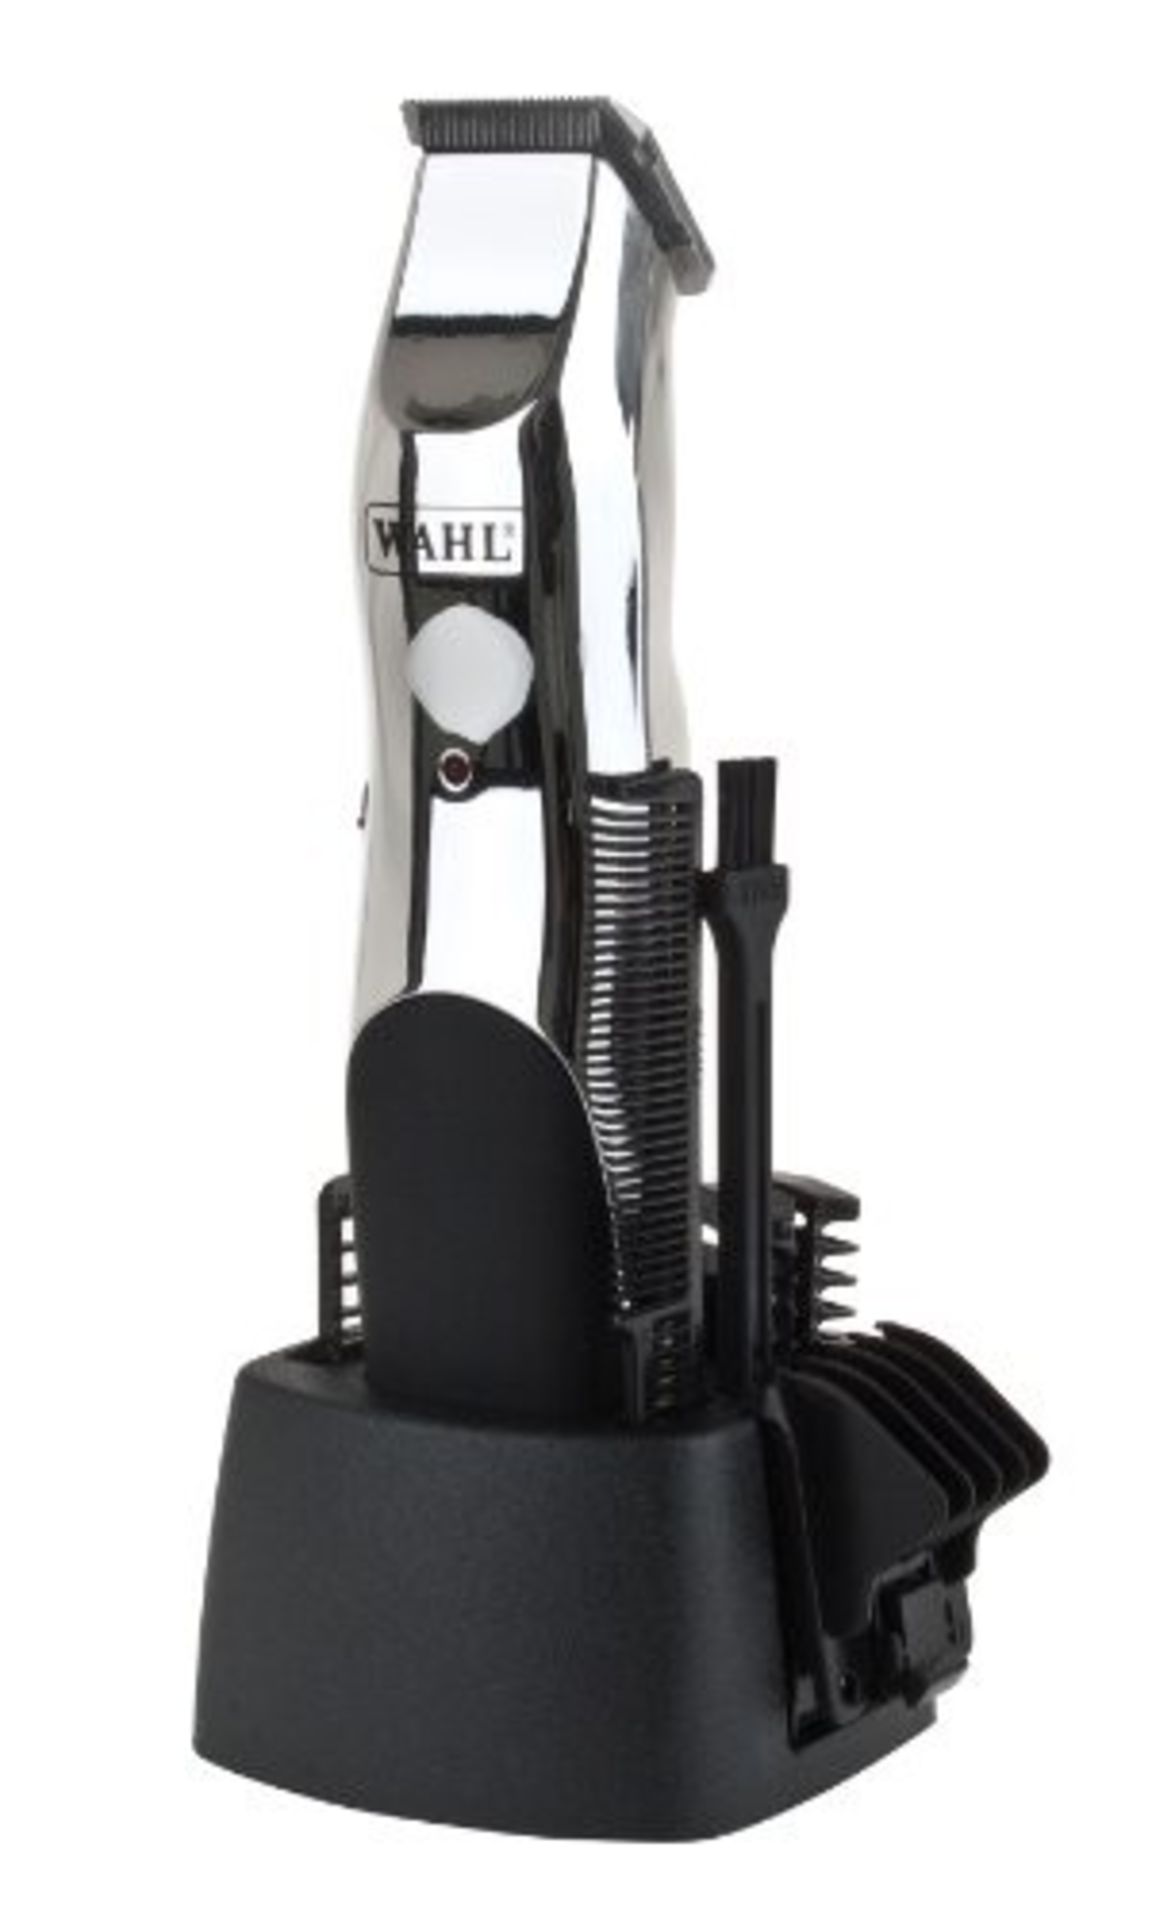 COMBINED RRP £104.00 LOT TO CONTAIN 6 ASSORTED Personal Care Appliances: Wahl, Wahl, Wahl, Wahl - Image 5 of 7